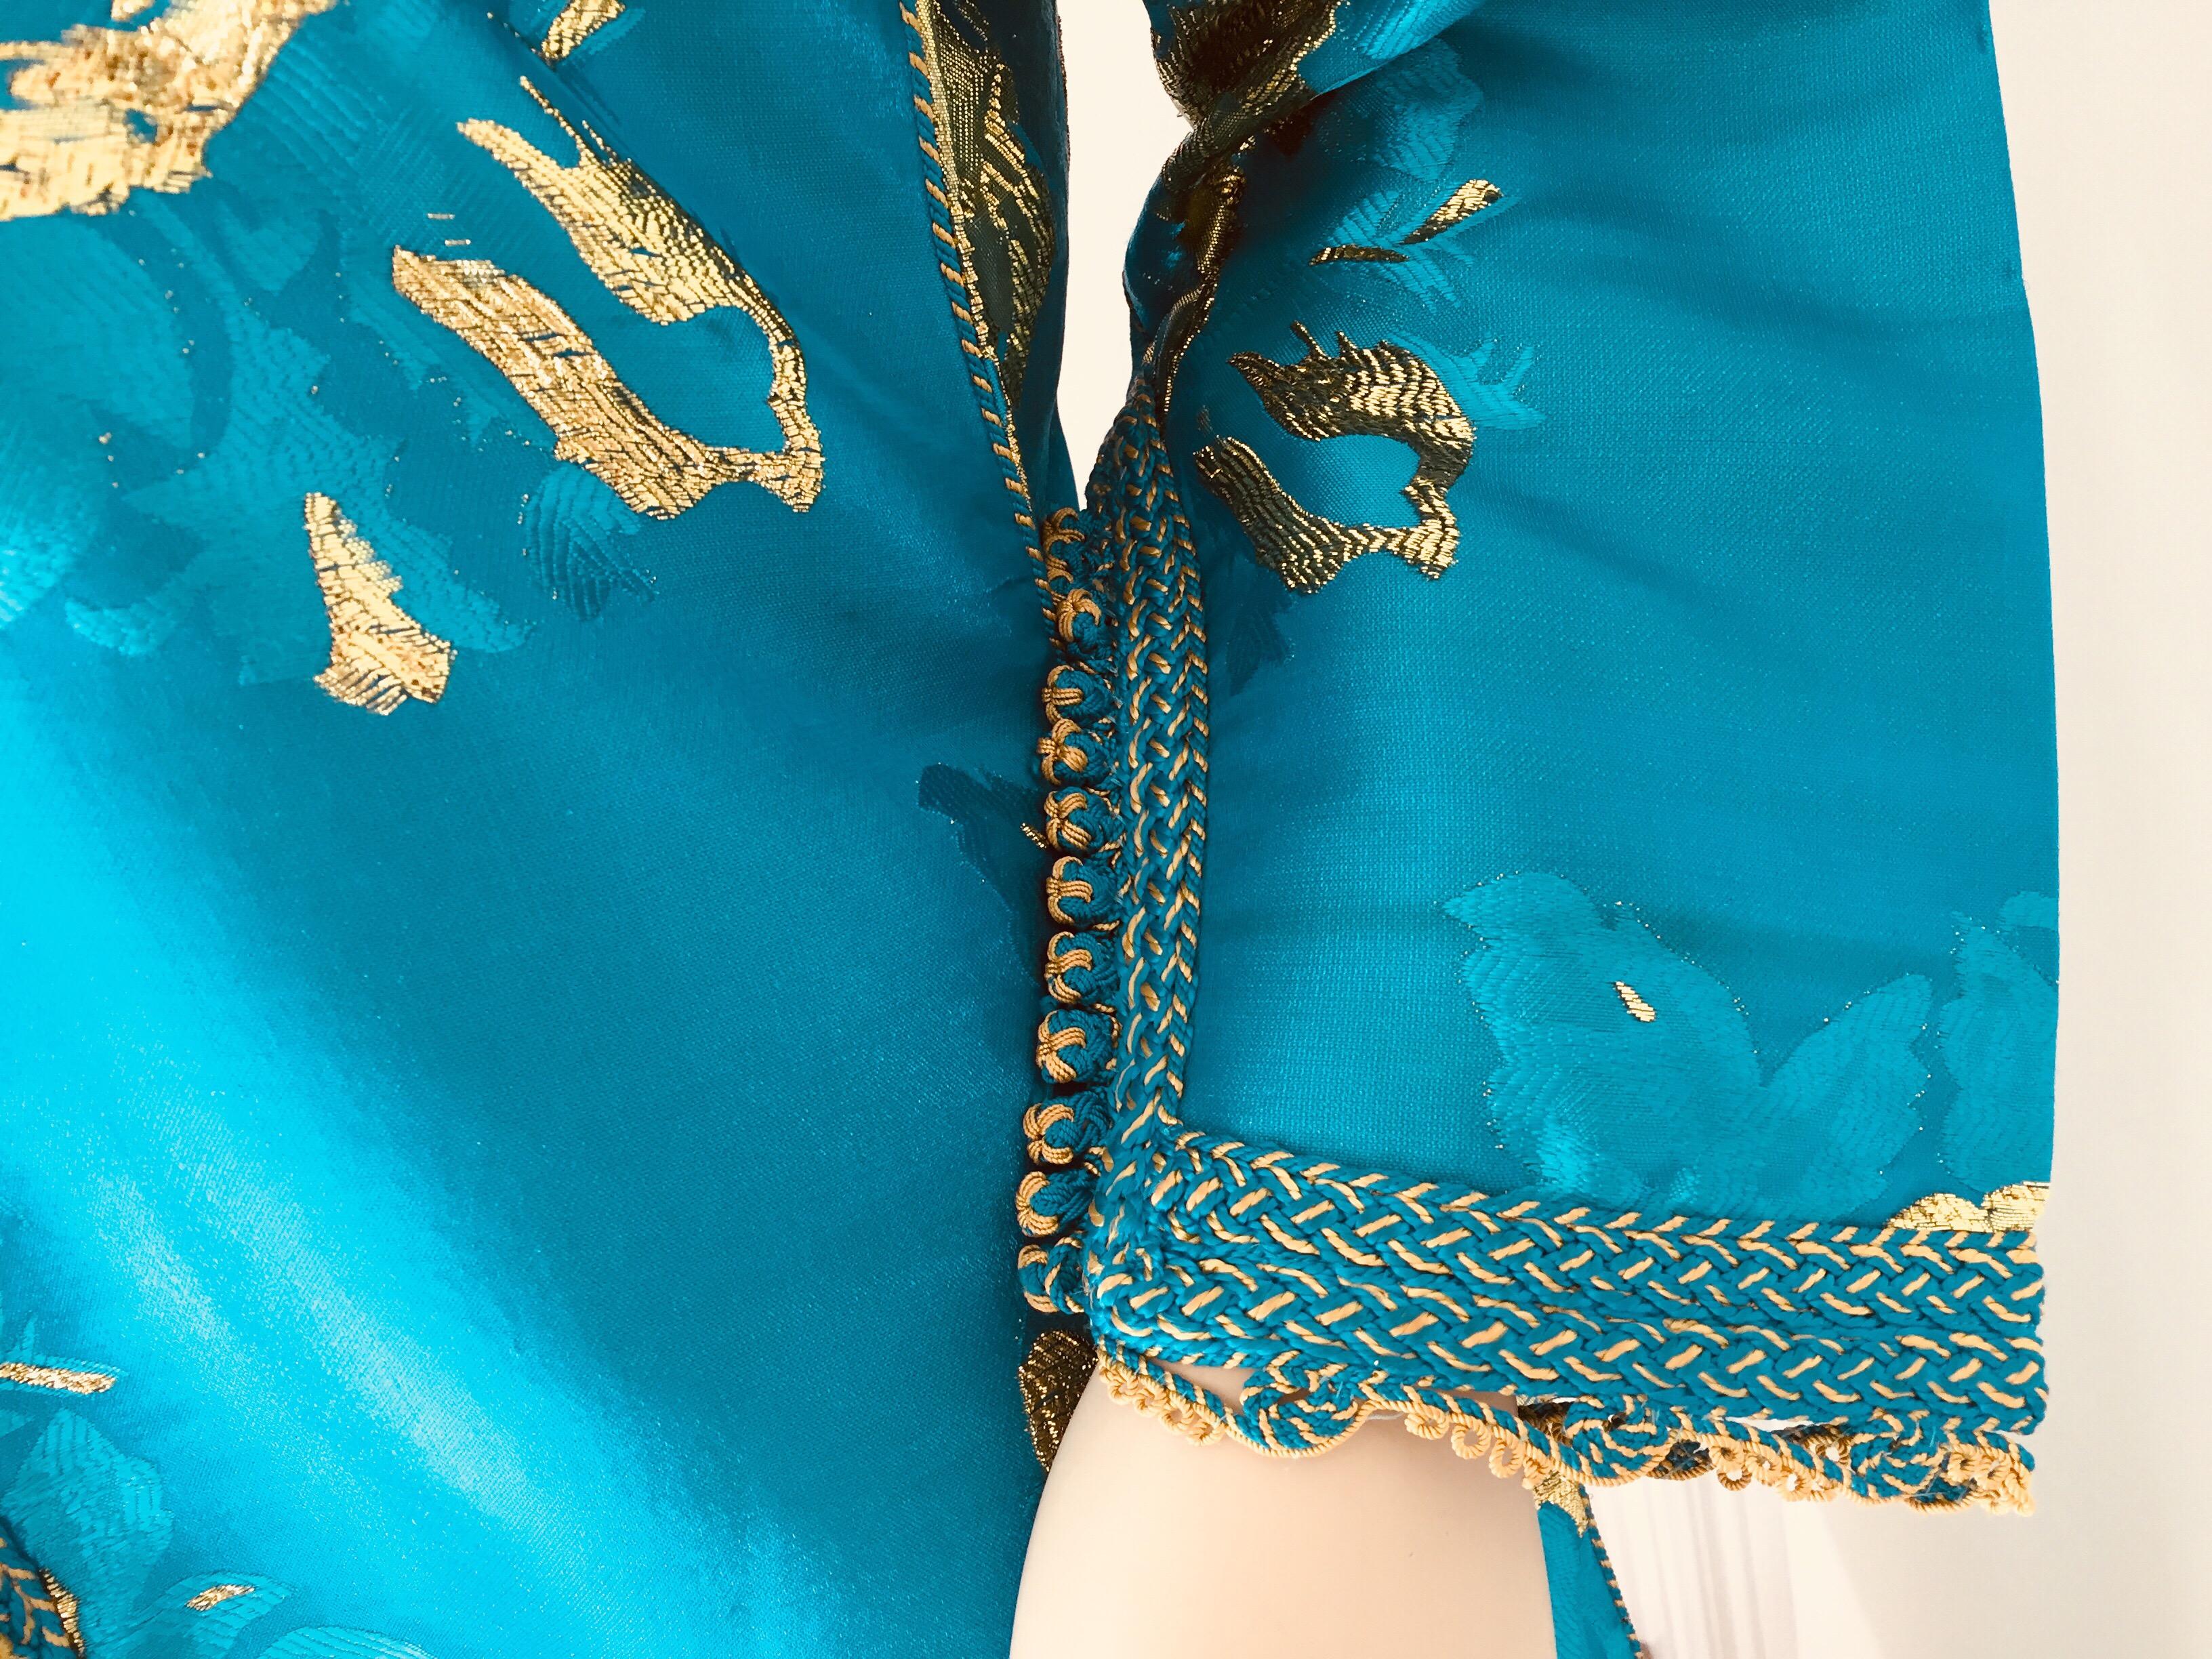 Fabric Moroccan Vintage Kaftan in Turquoise and Gold Floral Brocade Metallic Lame